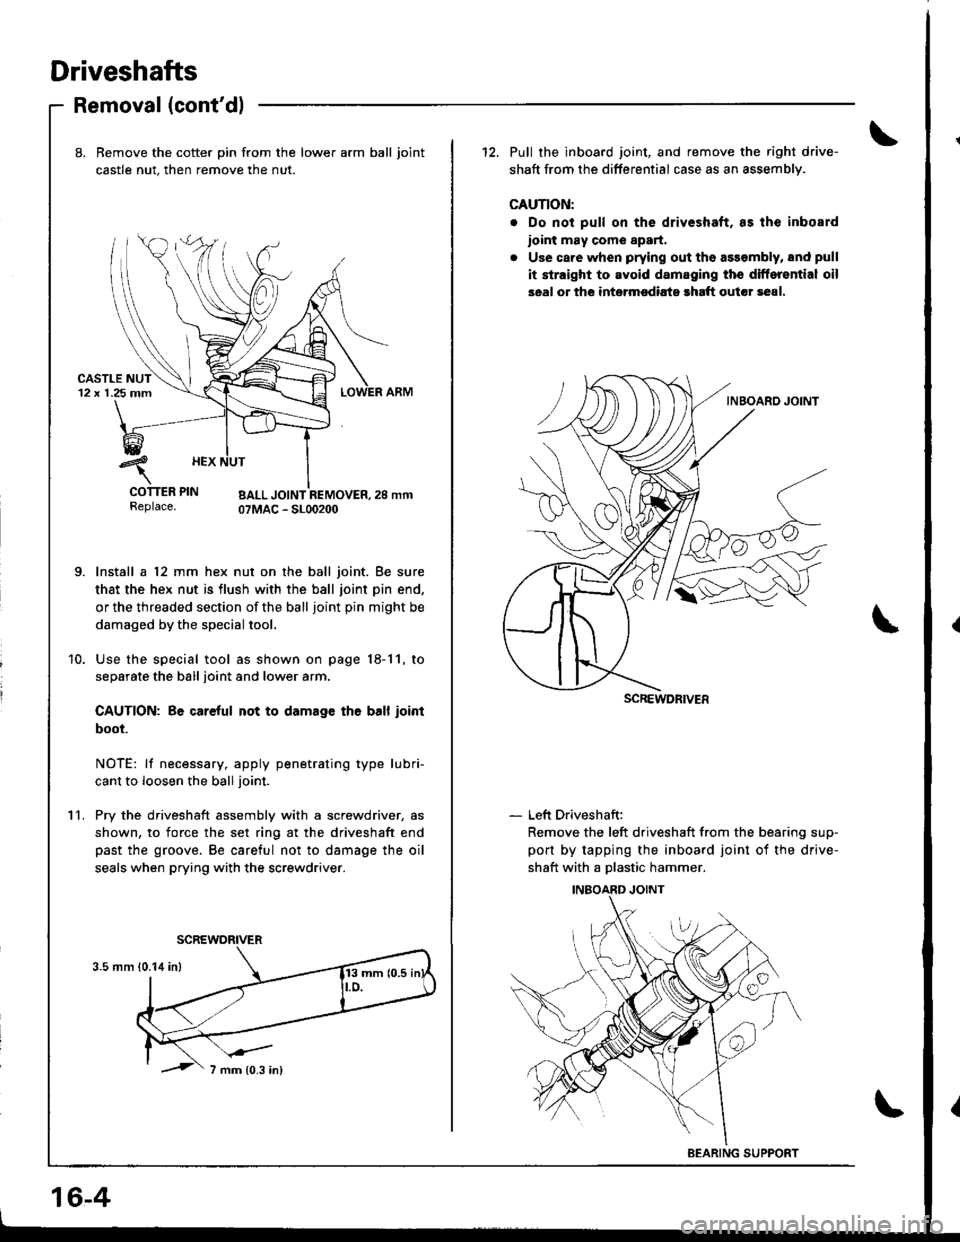 HONDA INTEGRA 1998 4.G Workshop Manual Driveshafts
Removal (contdl
11.
8. Bemove the cotter pin from the lower arm ball joint
castle nut. then remove the nut.
urJr rEr rrN BALL JOINT REMOVER,2S mmReplace. OTMAC - SLOO2OO
Install a 12 mm h